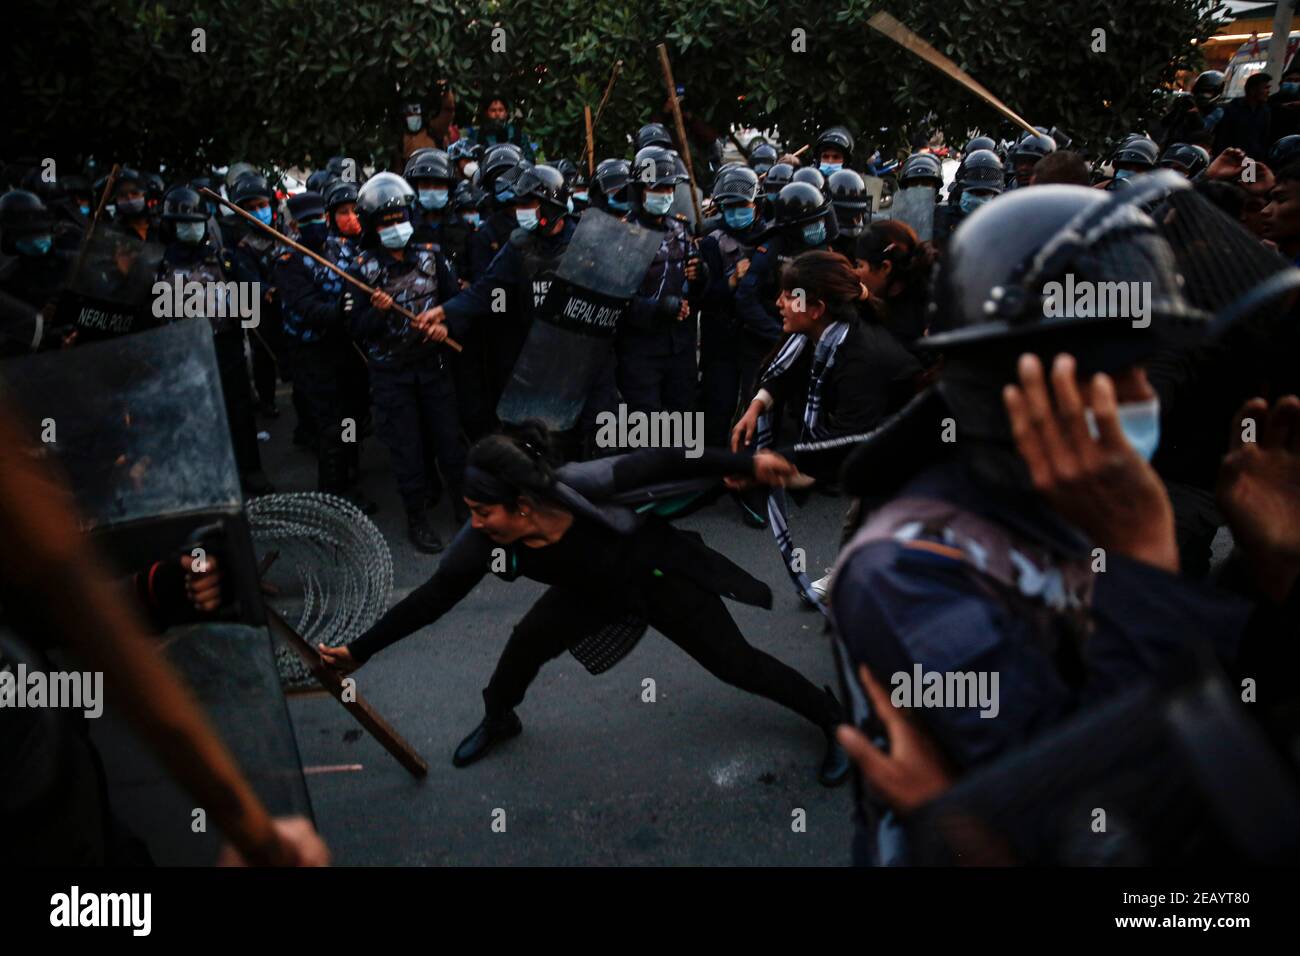 Kathmandu, Nepal. 11th Feb, 2021. Nepal Communist Party cadres clash with  the Police during a protest demanding release of Ram Kumari Jhakri, a  leader of former prime minister Pushpa Kamal Dahal led